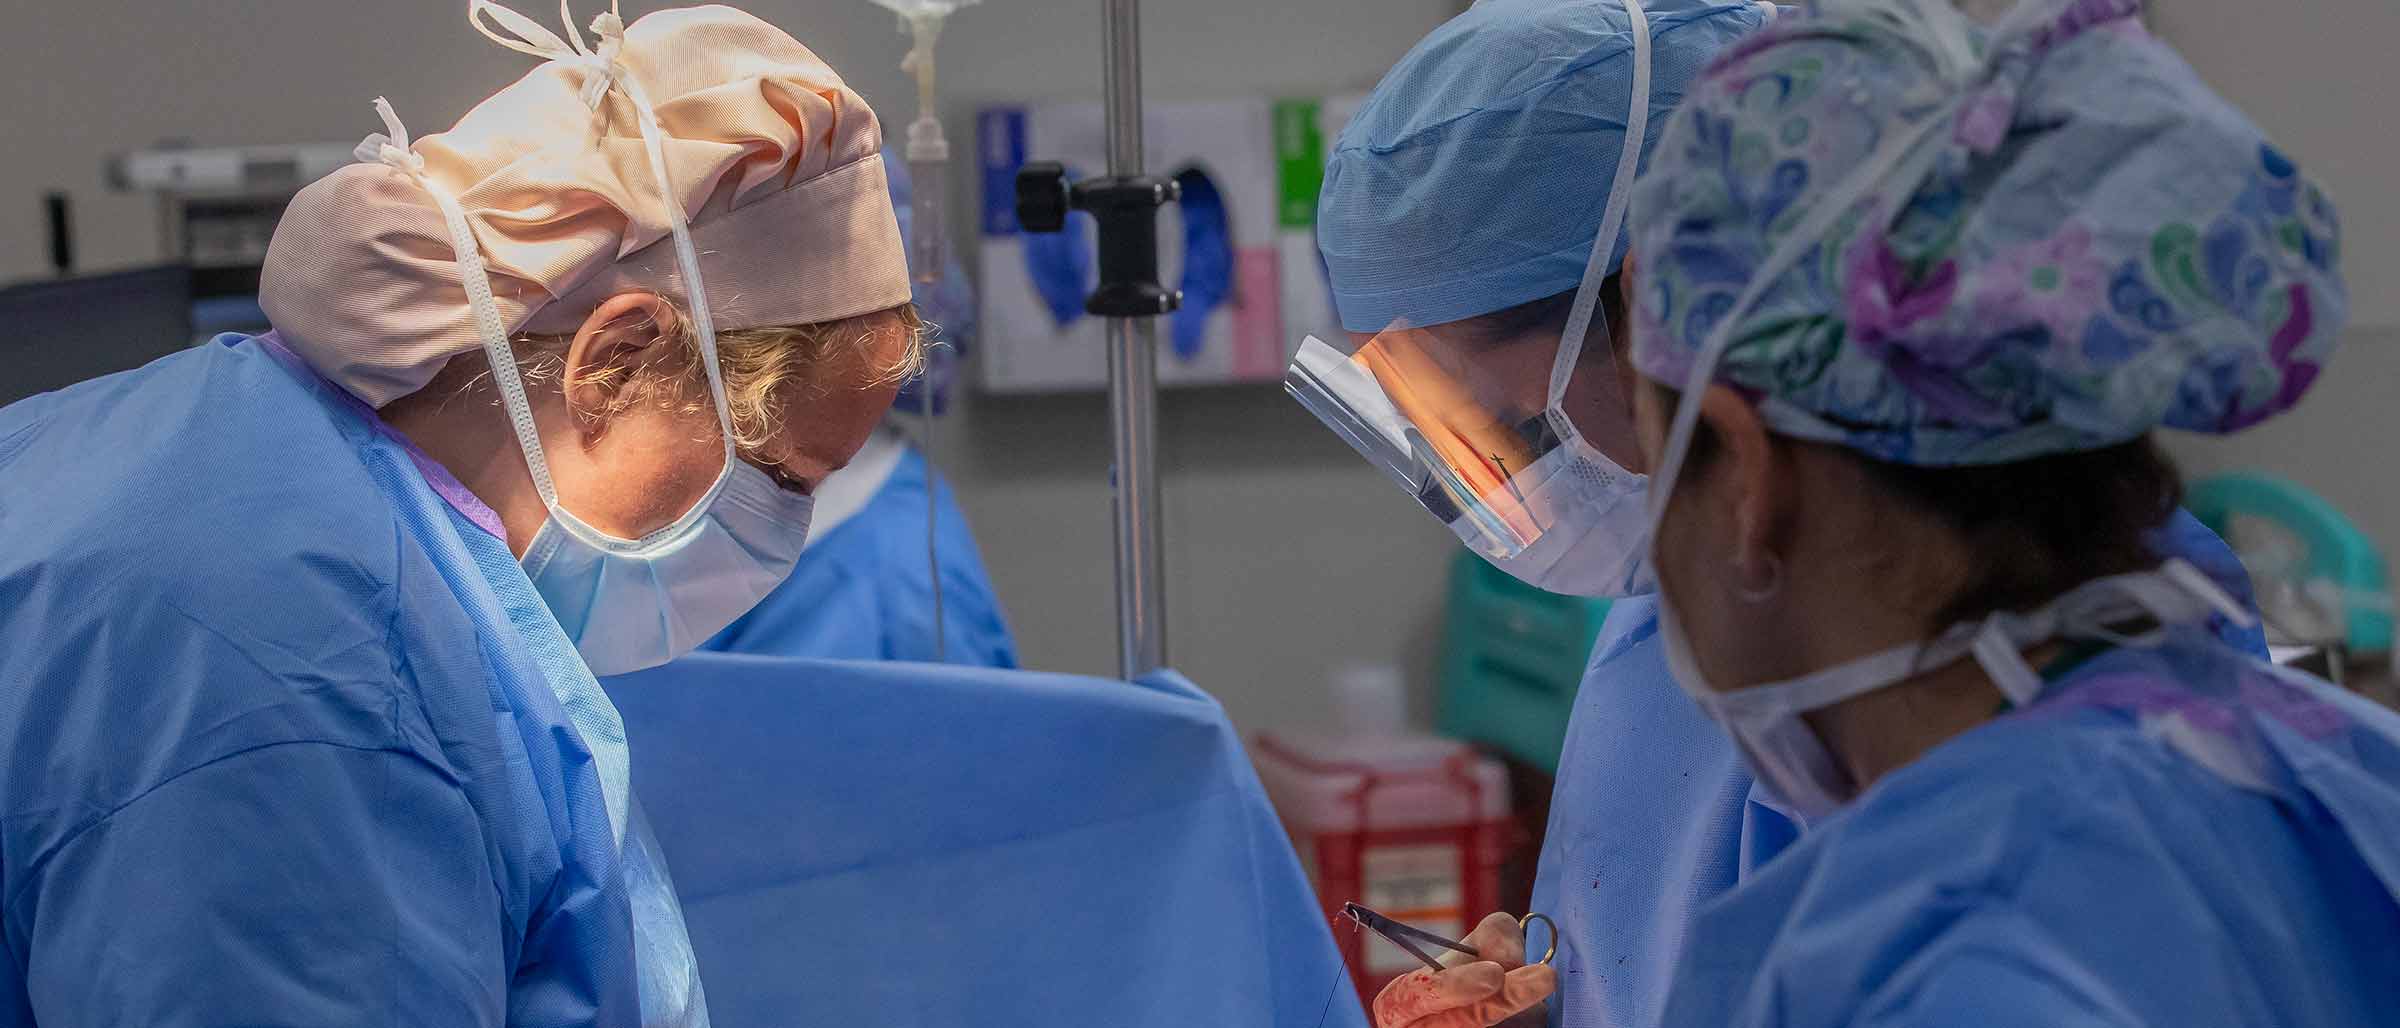 Three people in surgical scrubs performing surgery